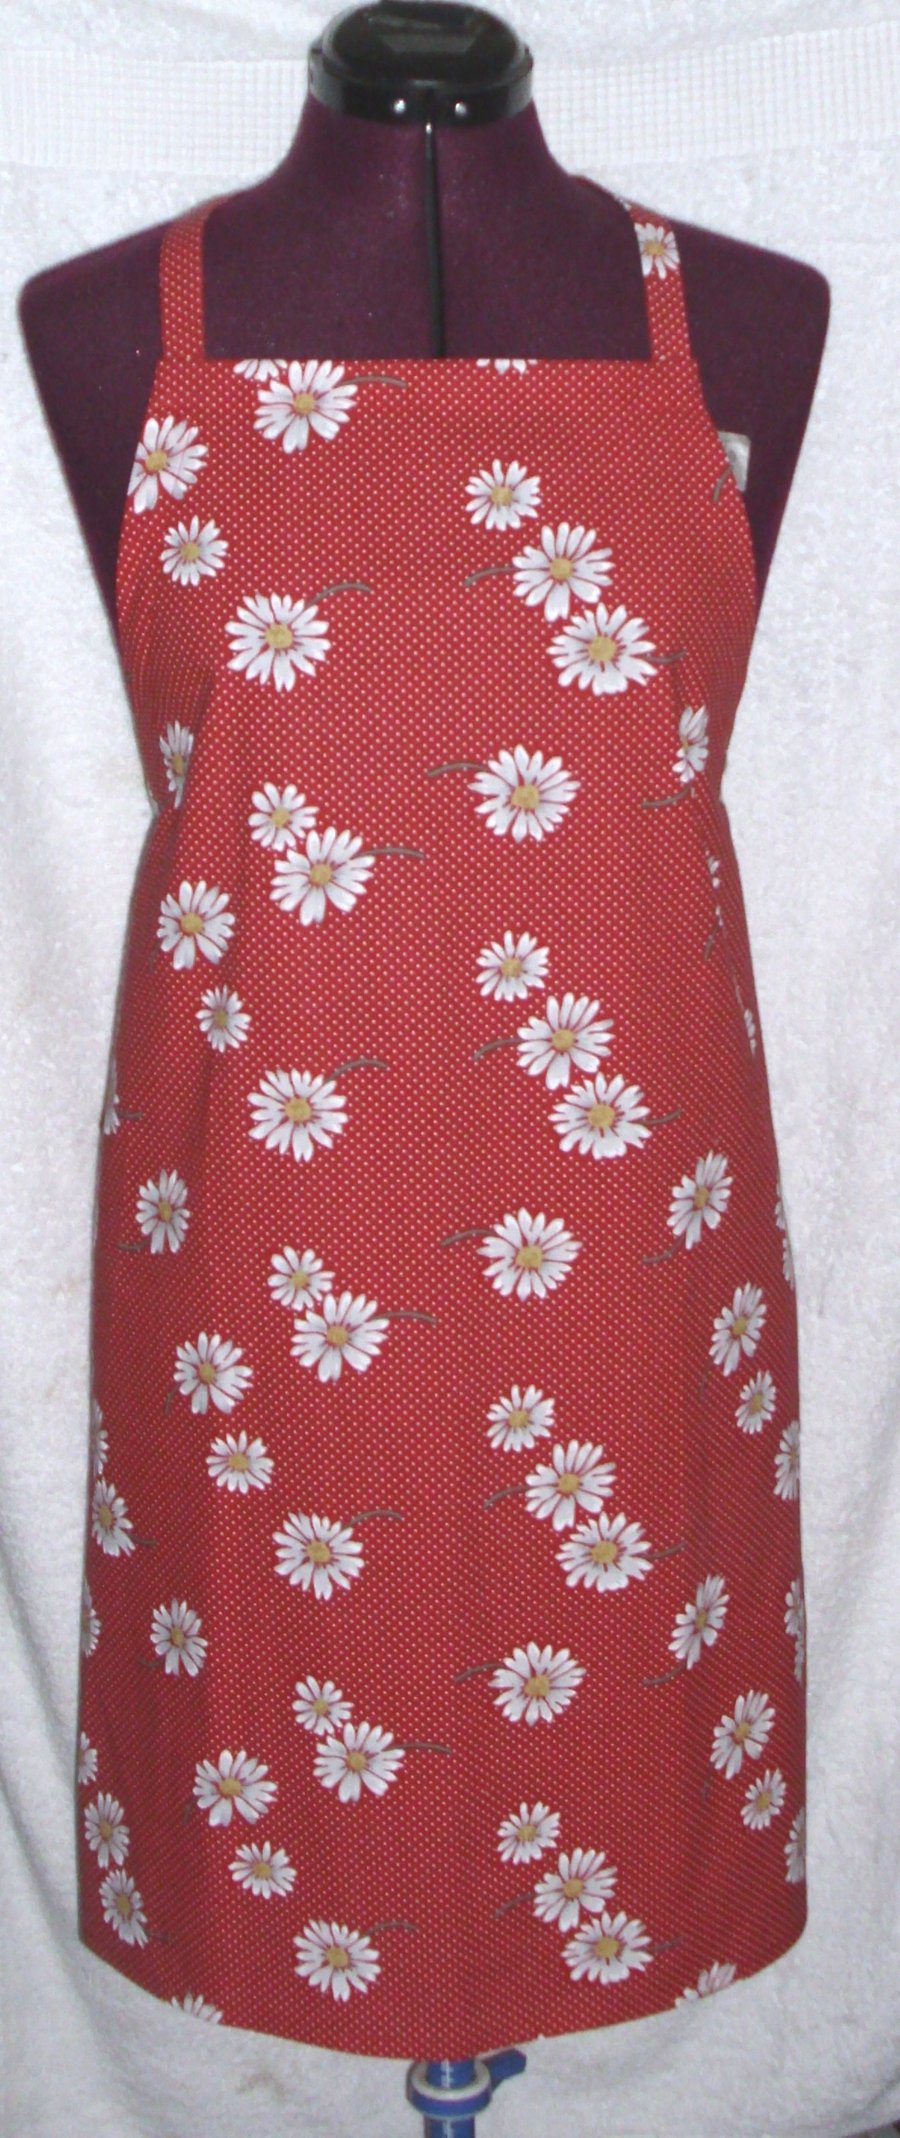 Bright White daisies on red Adult Apron 